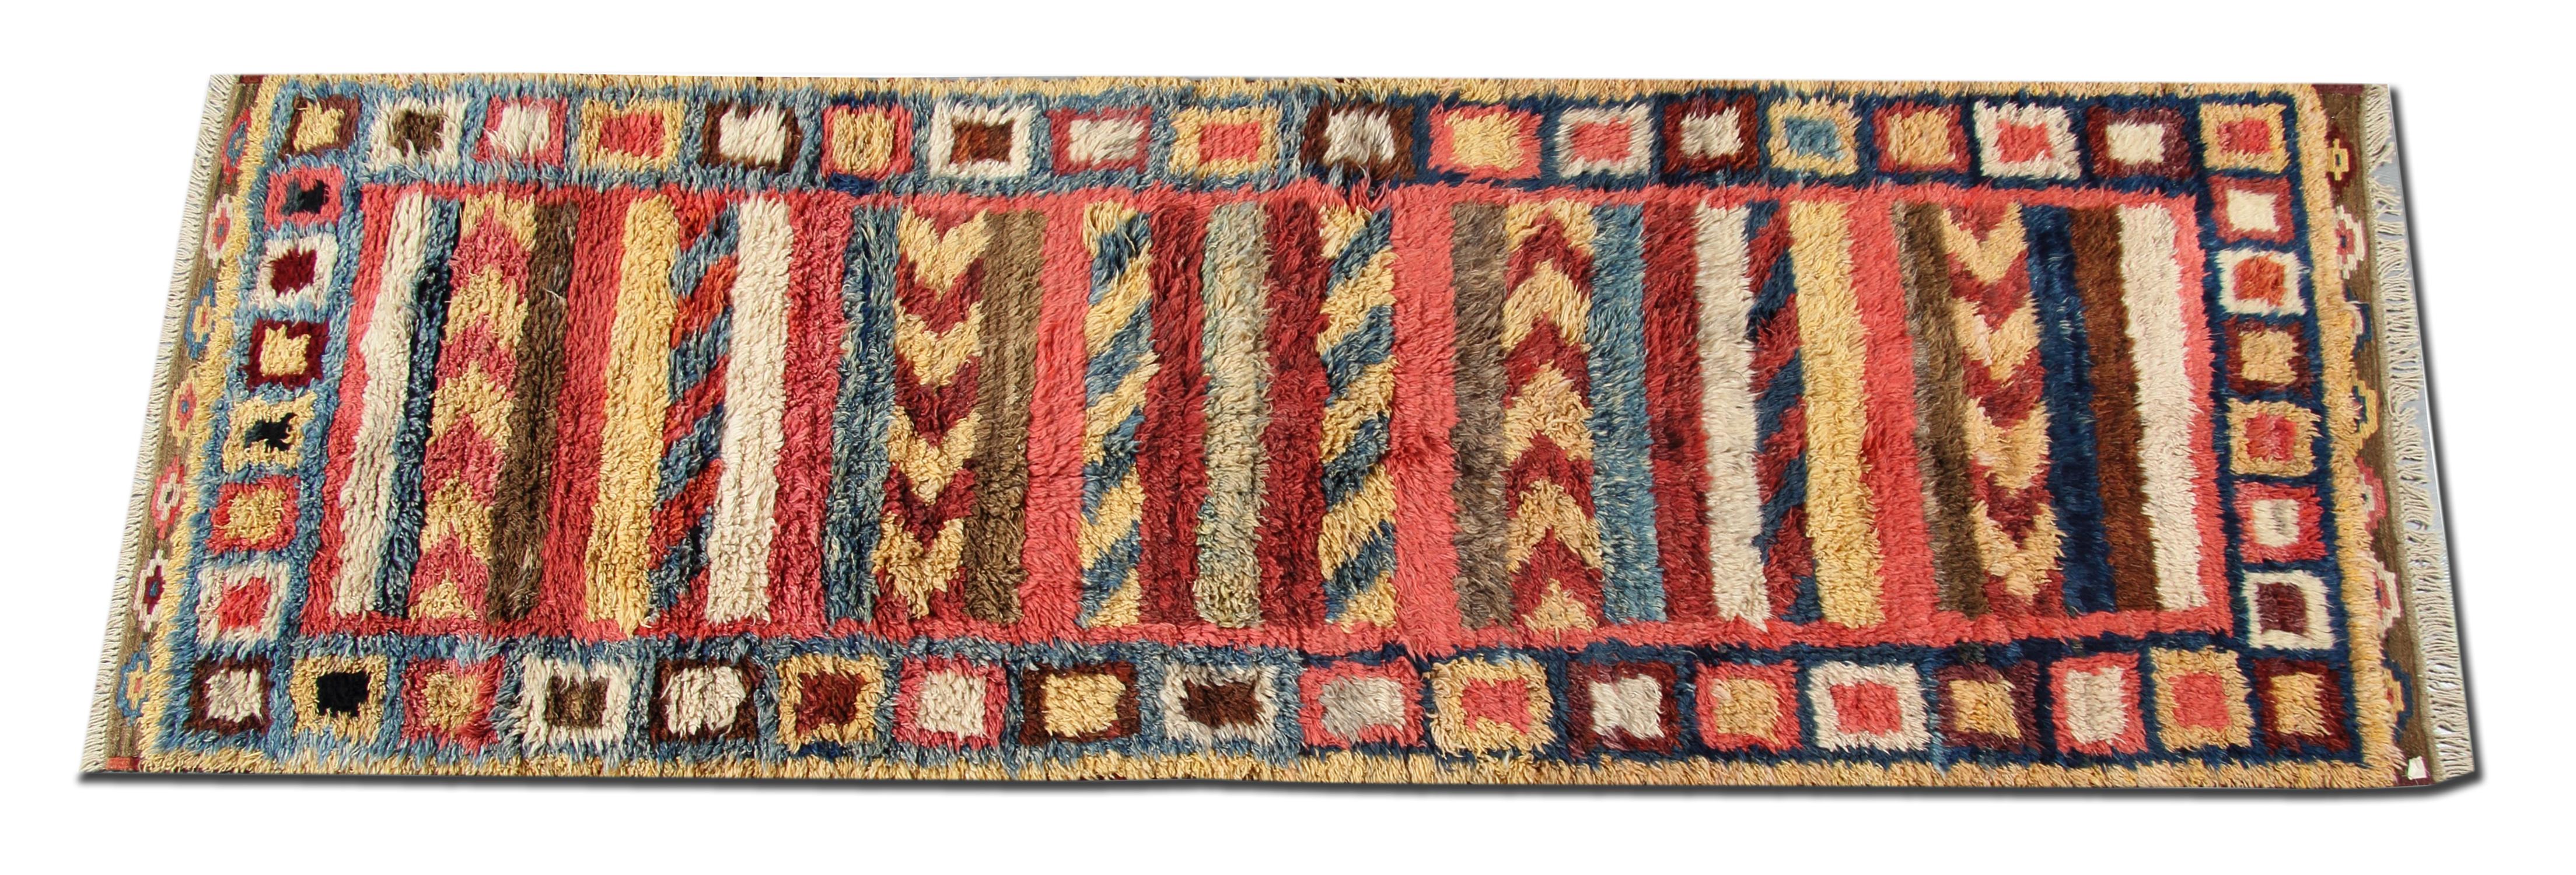 This handmade carpet is an example of handwoven rugs from Morrocco. Featuring designs that are traditional to the Morocco region. Morocco is famous for its primitive traditional rugs with long wool piles. Weavers used top quality hand-spun wool and